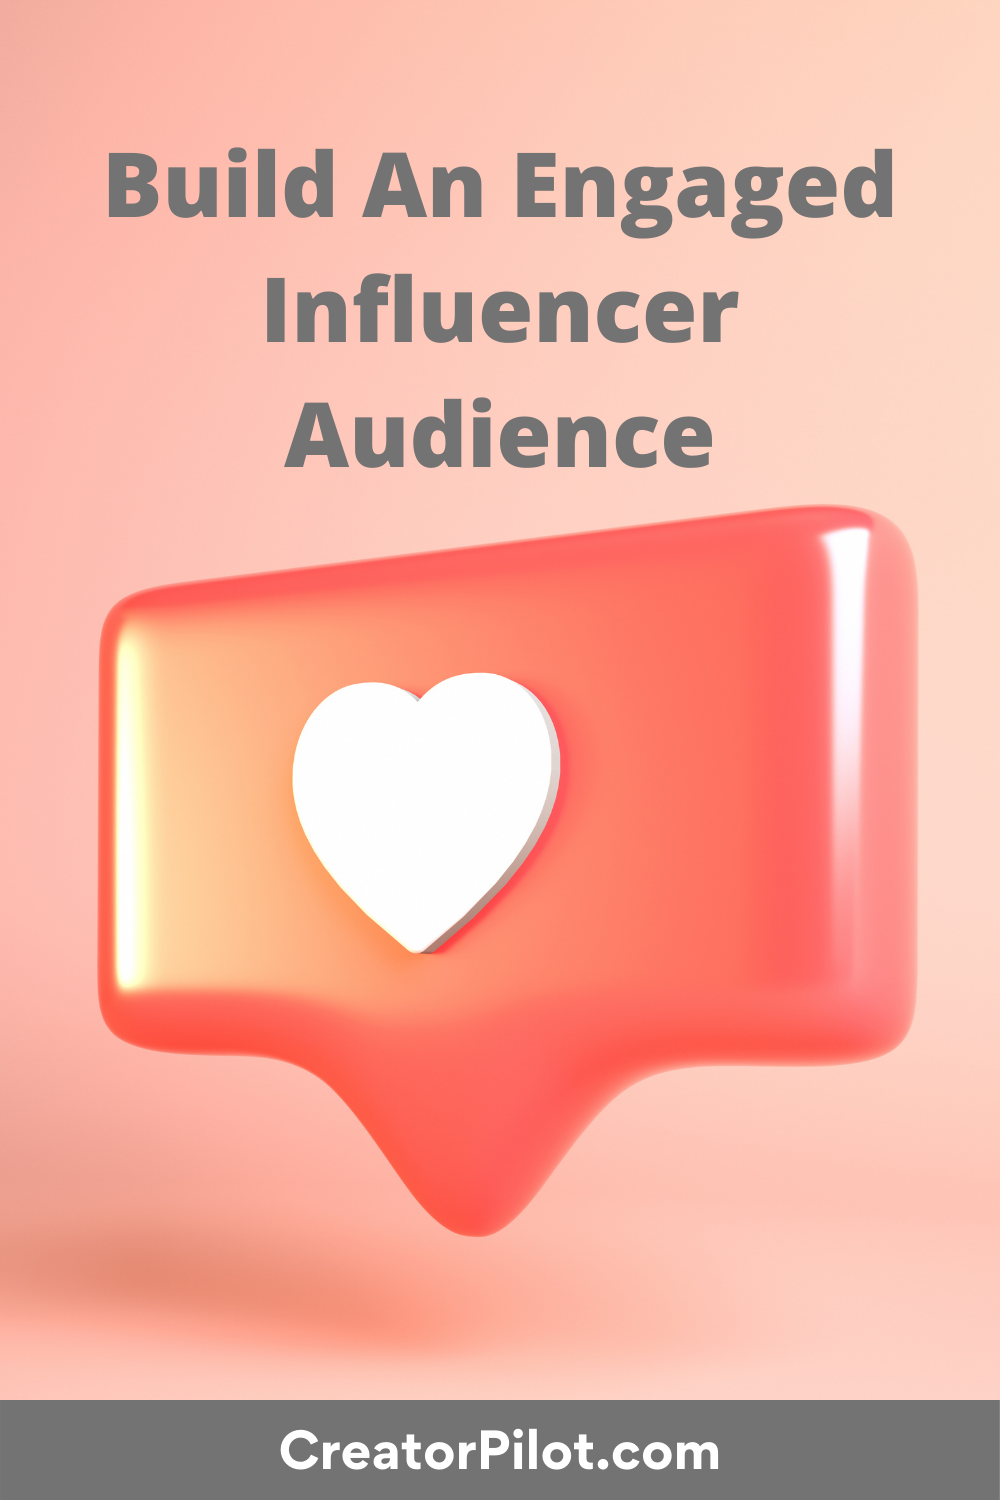 build an engaged Influencer audience